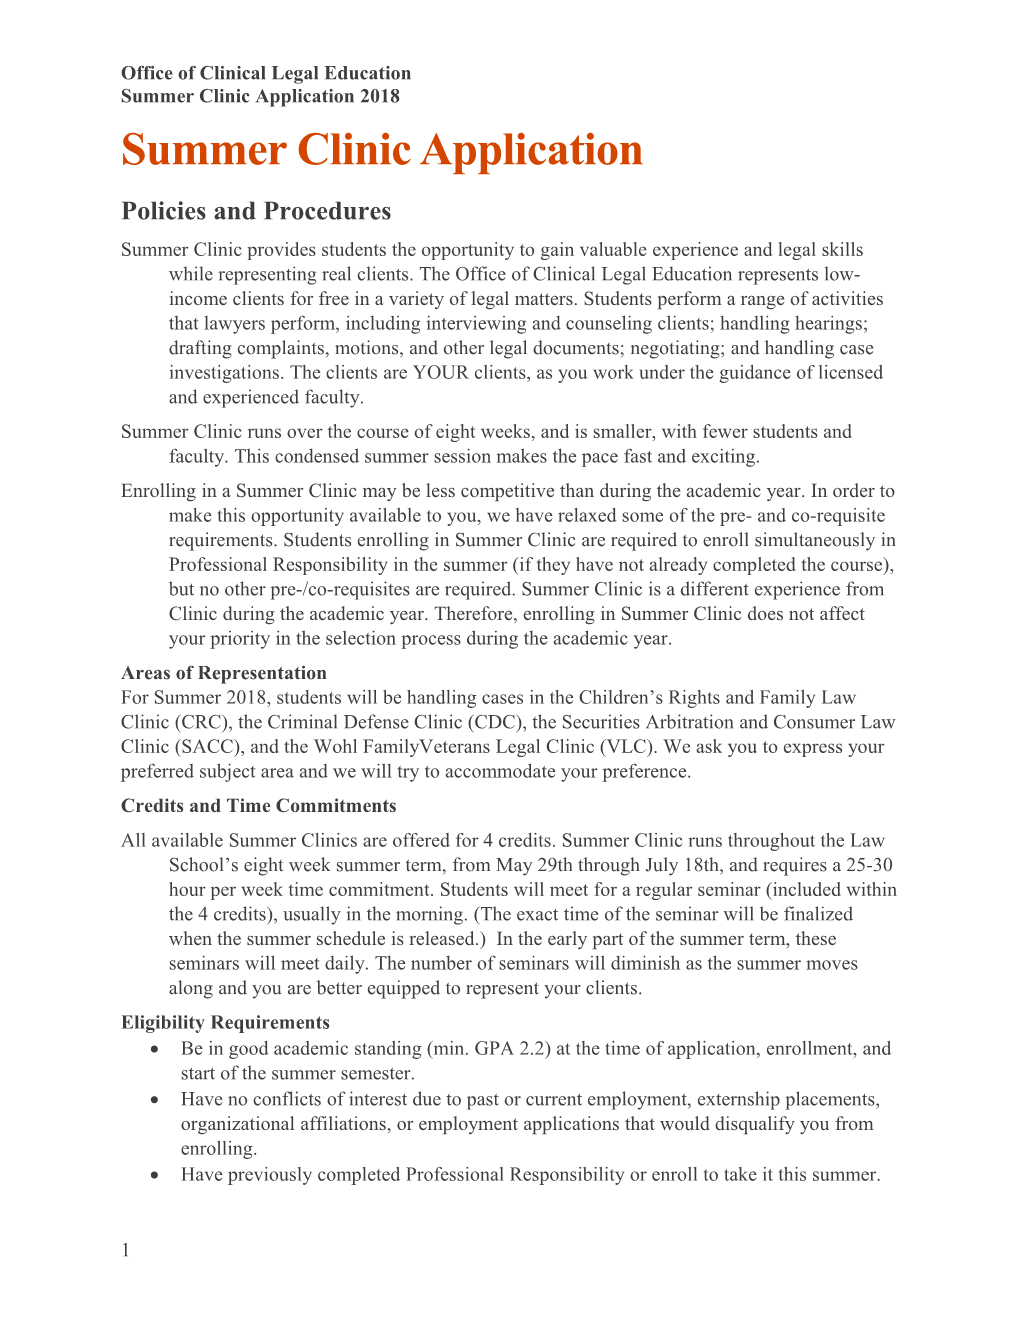 Office of Clinical Legal Education Summer Clinic Application 2018